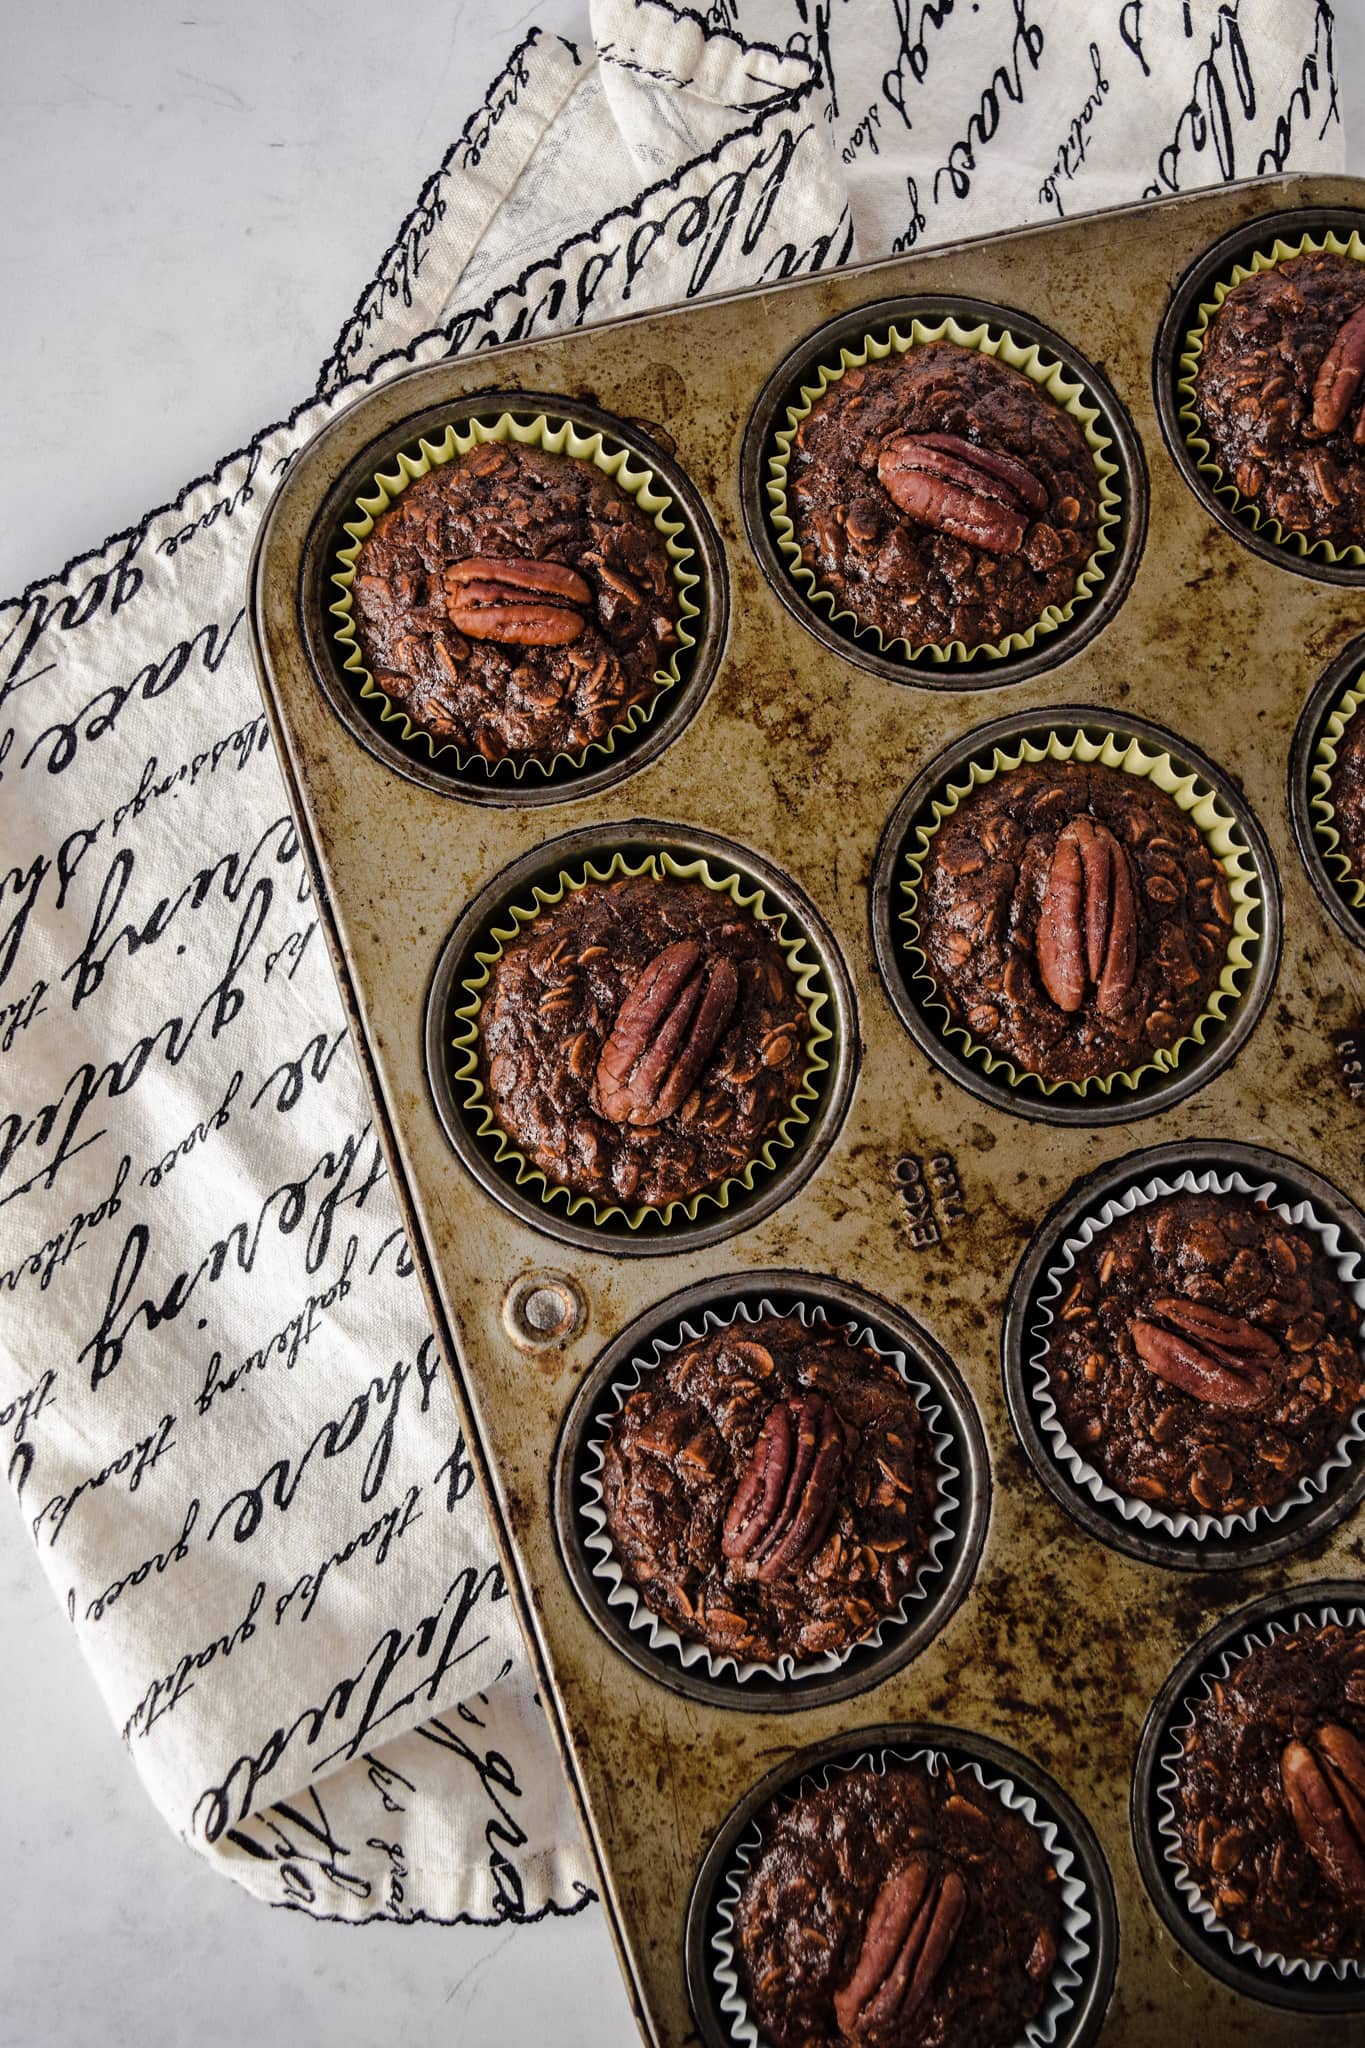 Muffin Pan with Choc Pecan Baked Oatmeal